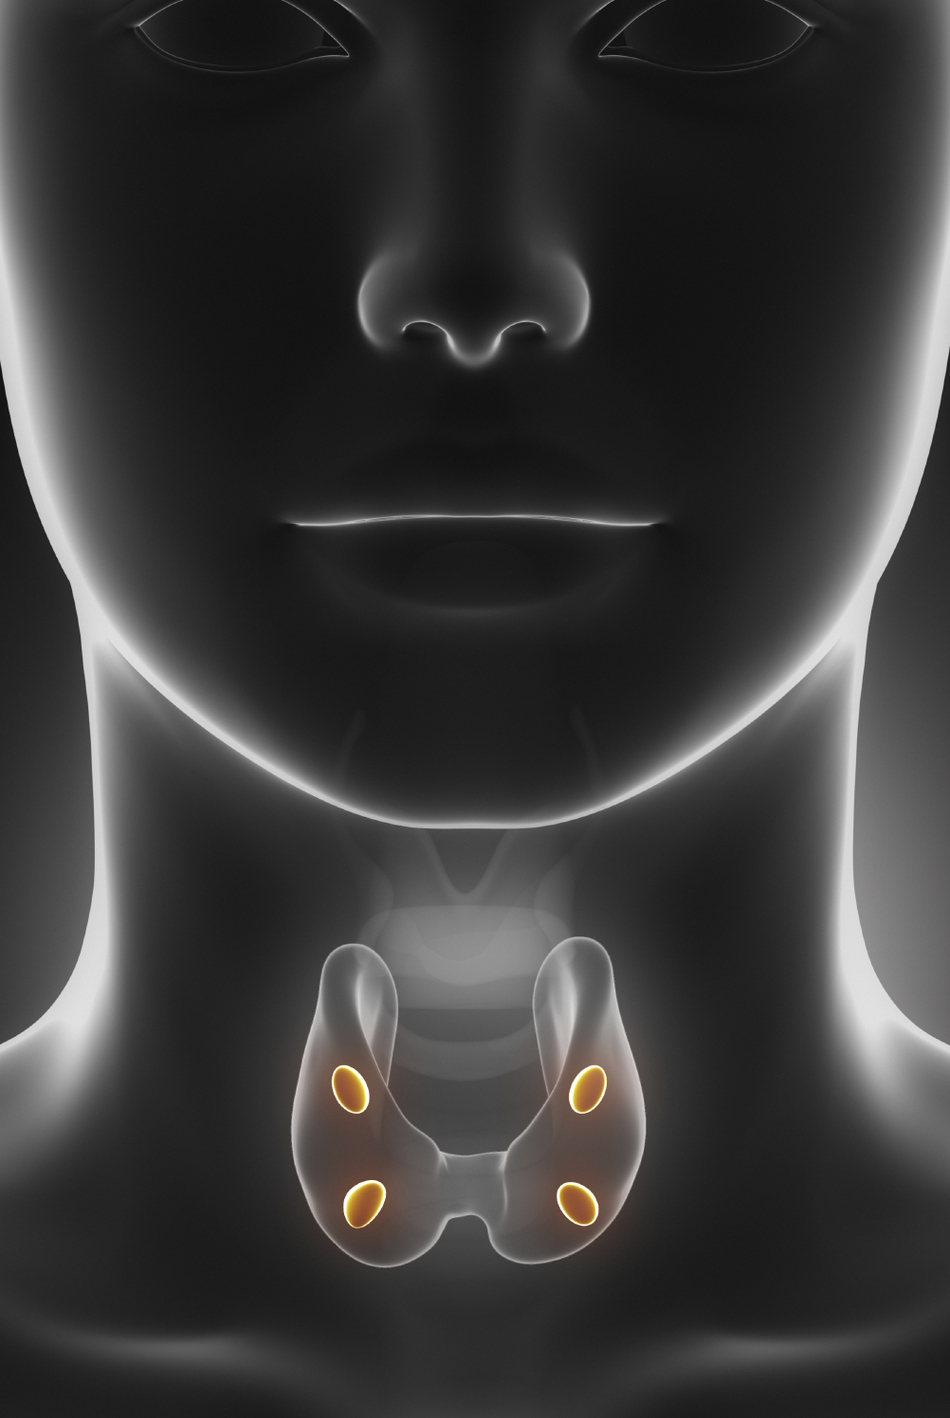 Should I Worry About Thyroid Nodules?